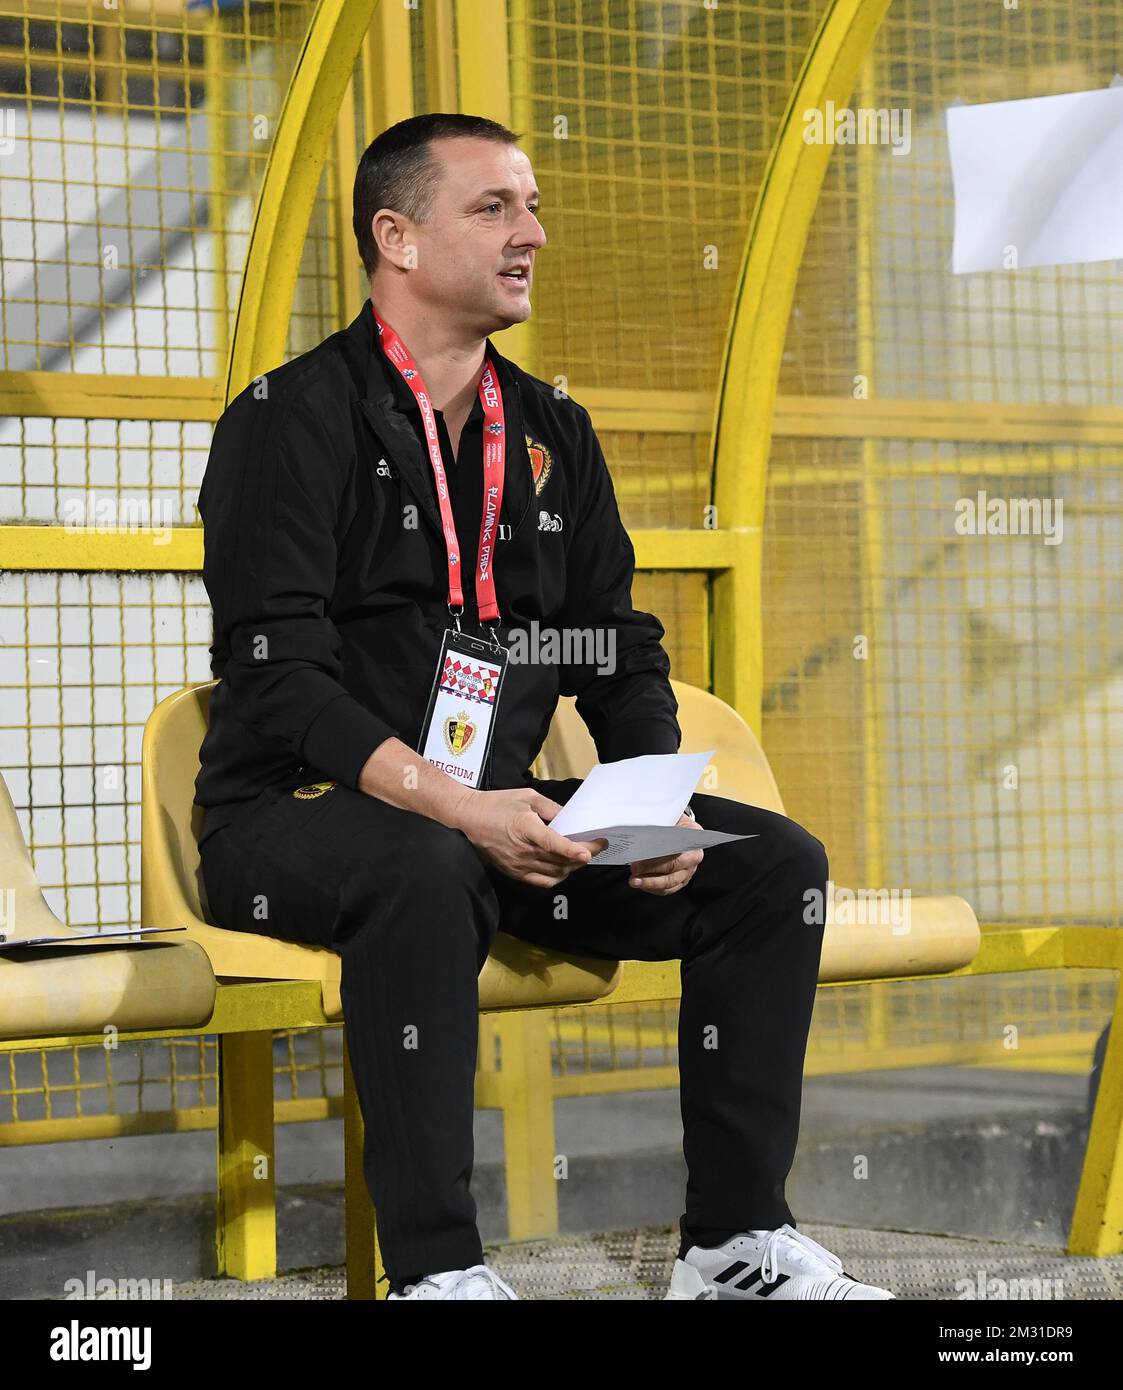 Belgium's head coach Ives Serneels pictured ahead of a soccer game between Croatia and Belgium's Red Flames, Friday 08 November 2019 in Zapresic, Croatia, the third out of 8 qualification games for the women's Euro 2021 European Championships. BELGA PHOTO DAVID CATRY Stock Photo